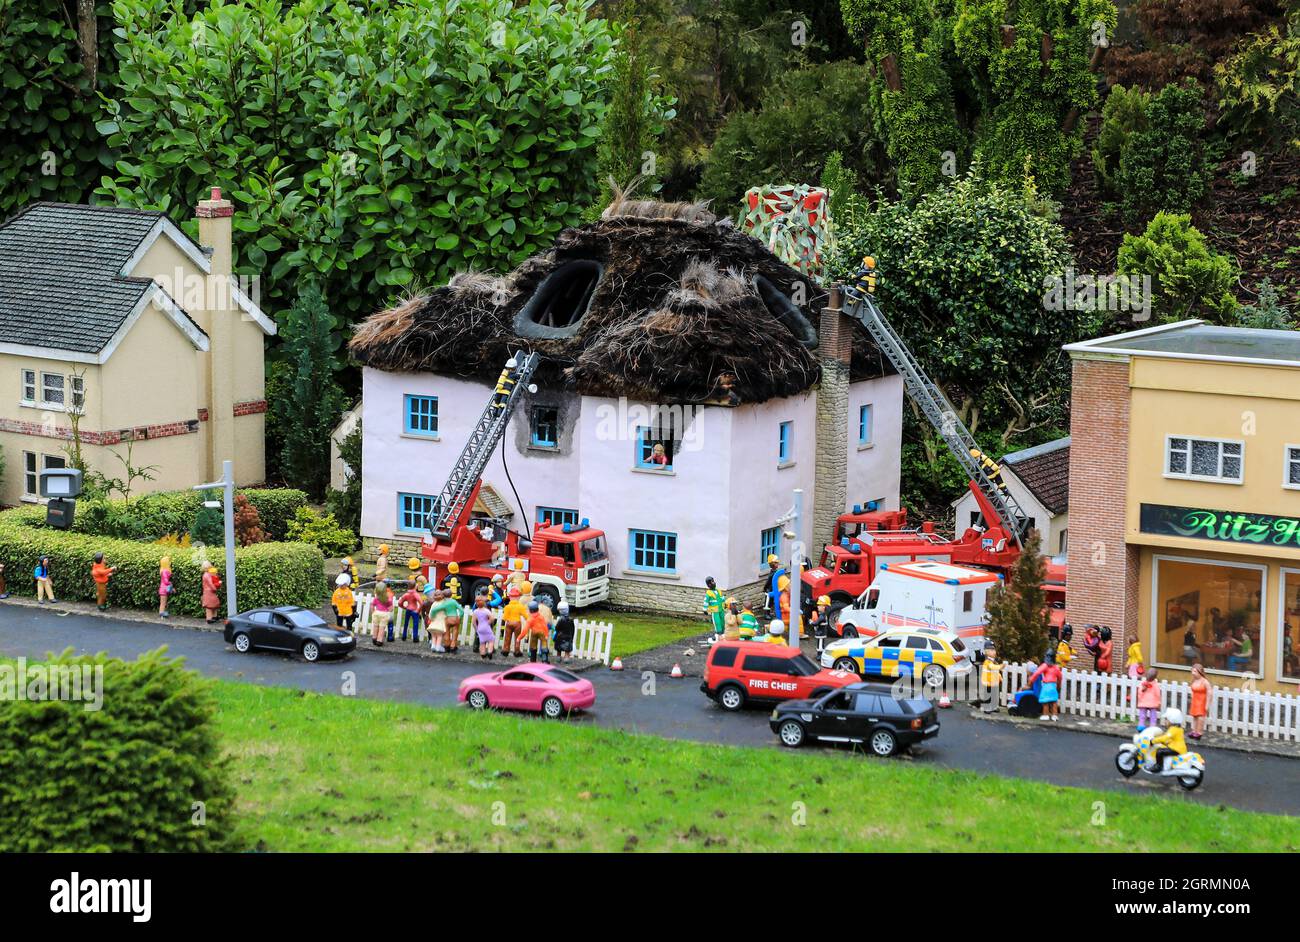 The fire brigade attending a fire at a thatched cottage at Babbacombe Model Village, Babbacombe, Torquay, Devon, England, UK Stock Photo